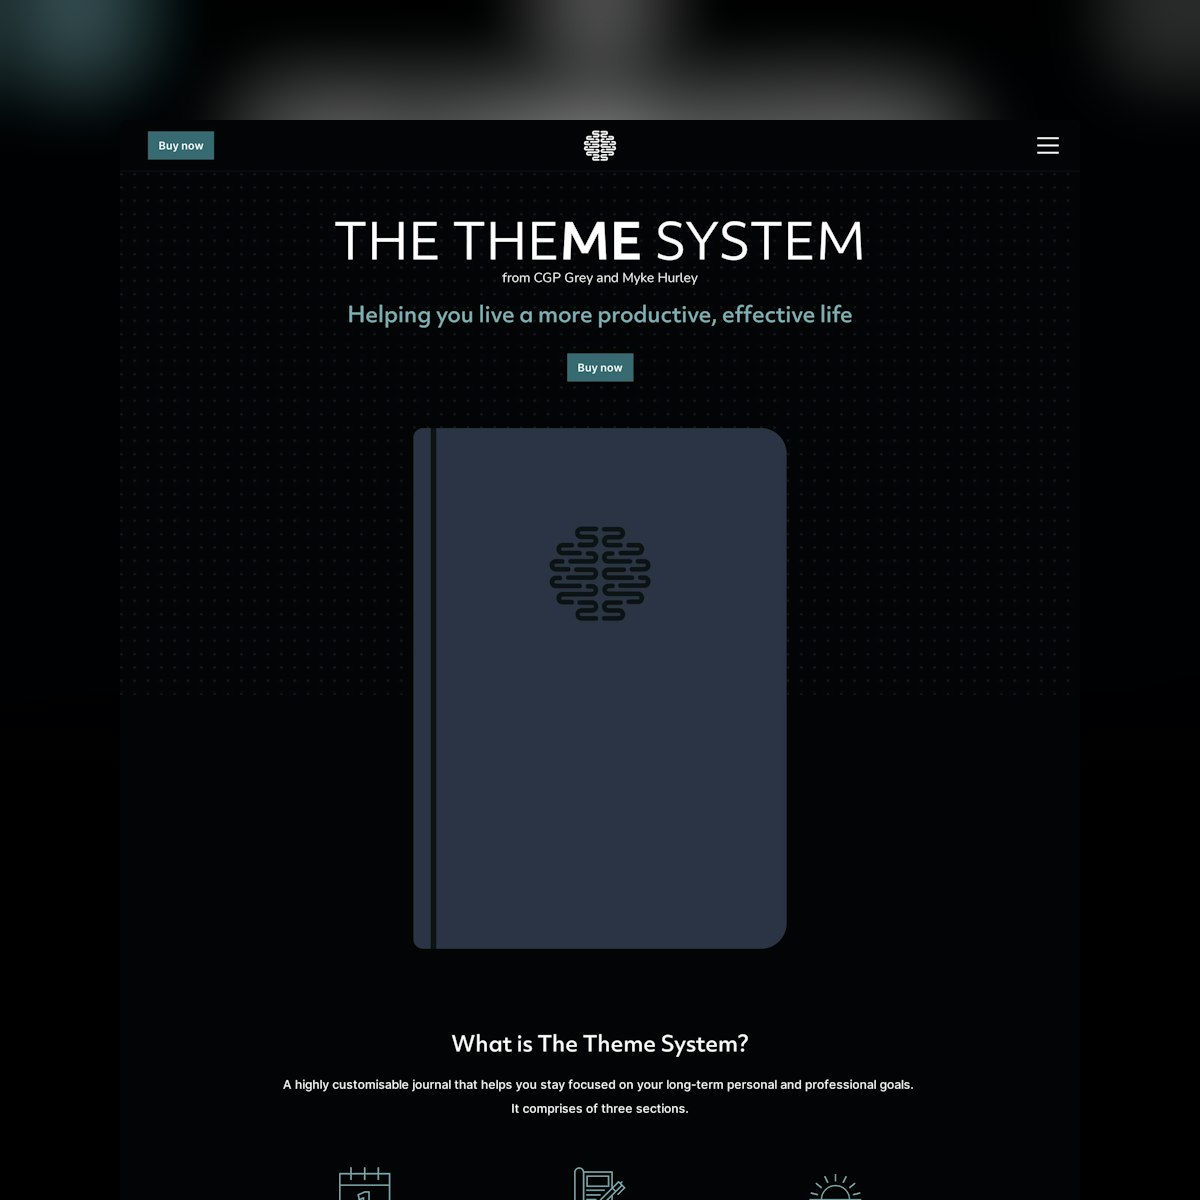 Product Page screen design idea #438: Website Inspiration: The Theme System